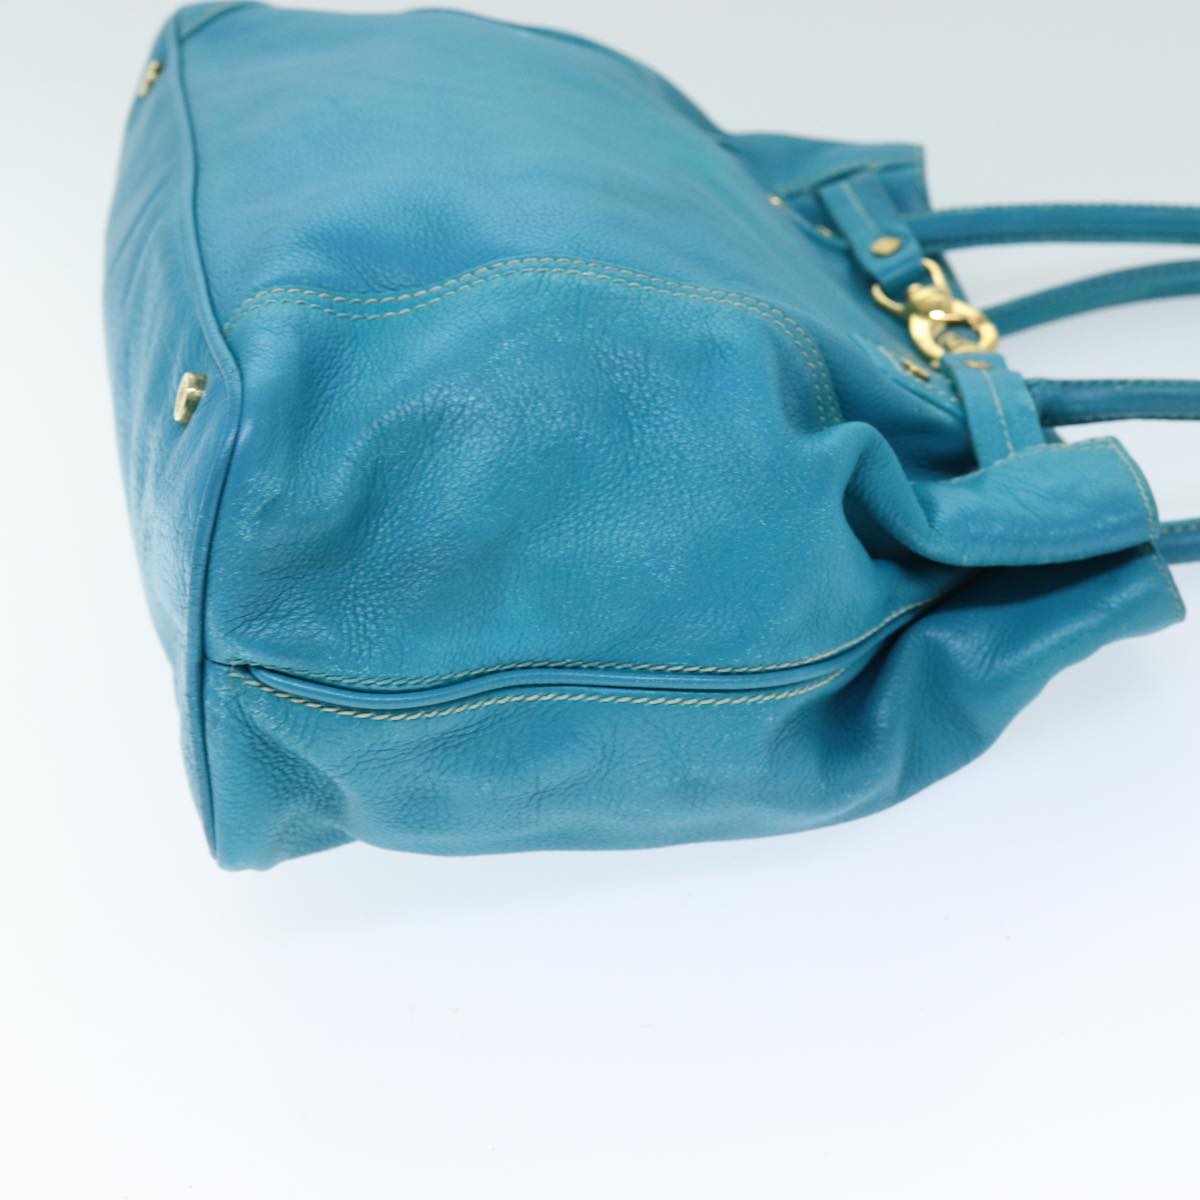 CELINE Tote Bag Leather Turquoise Blue Auth 74223